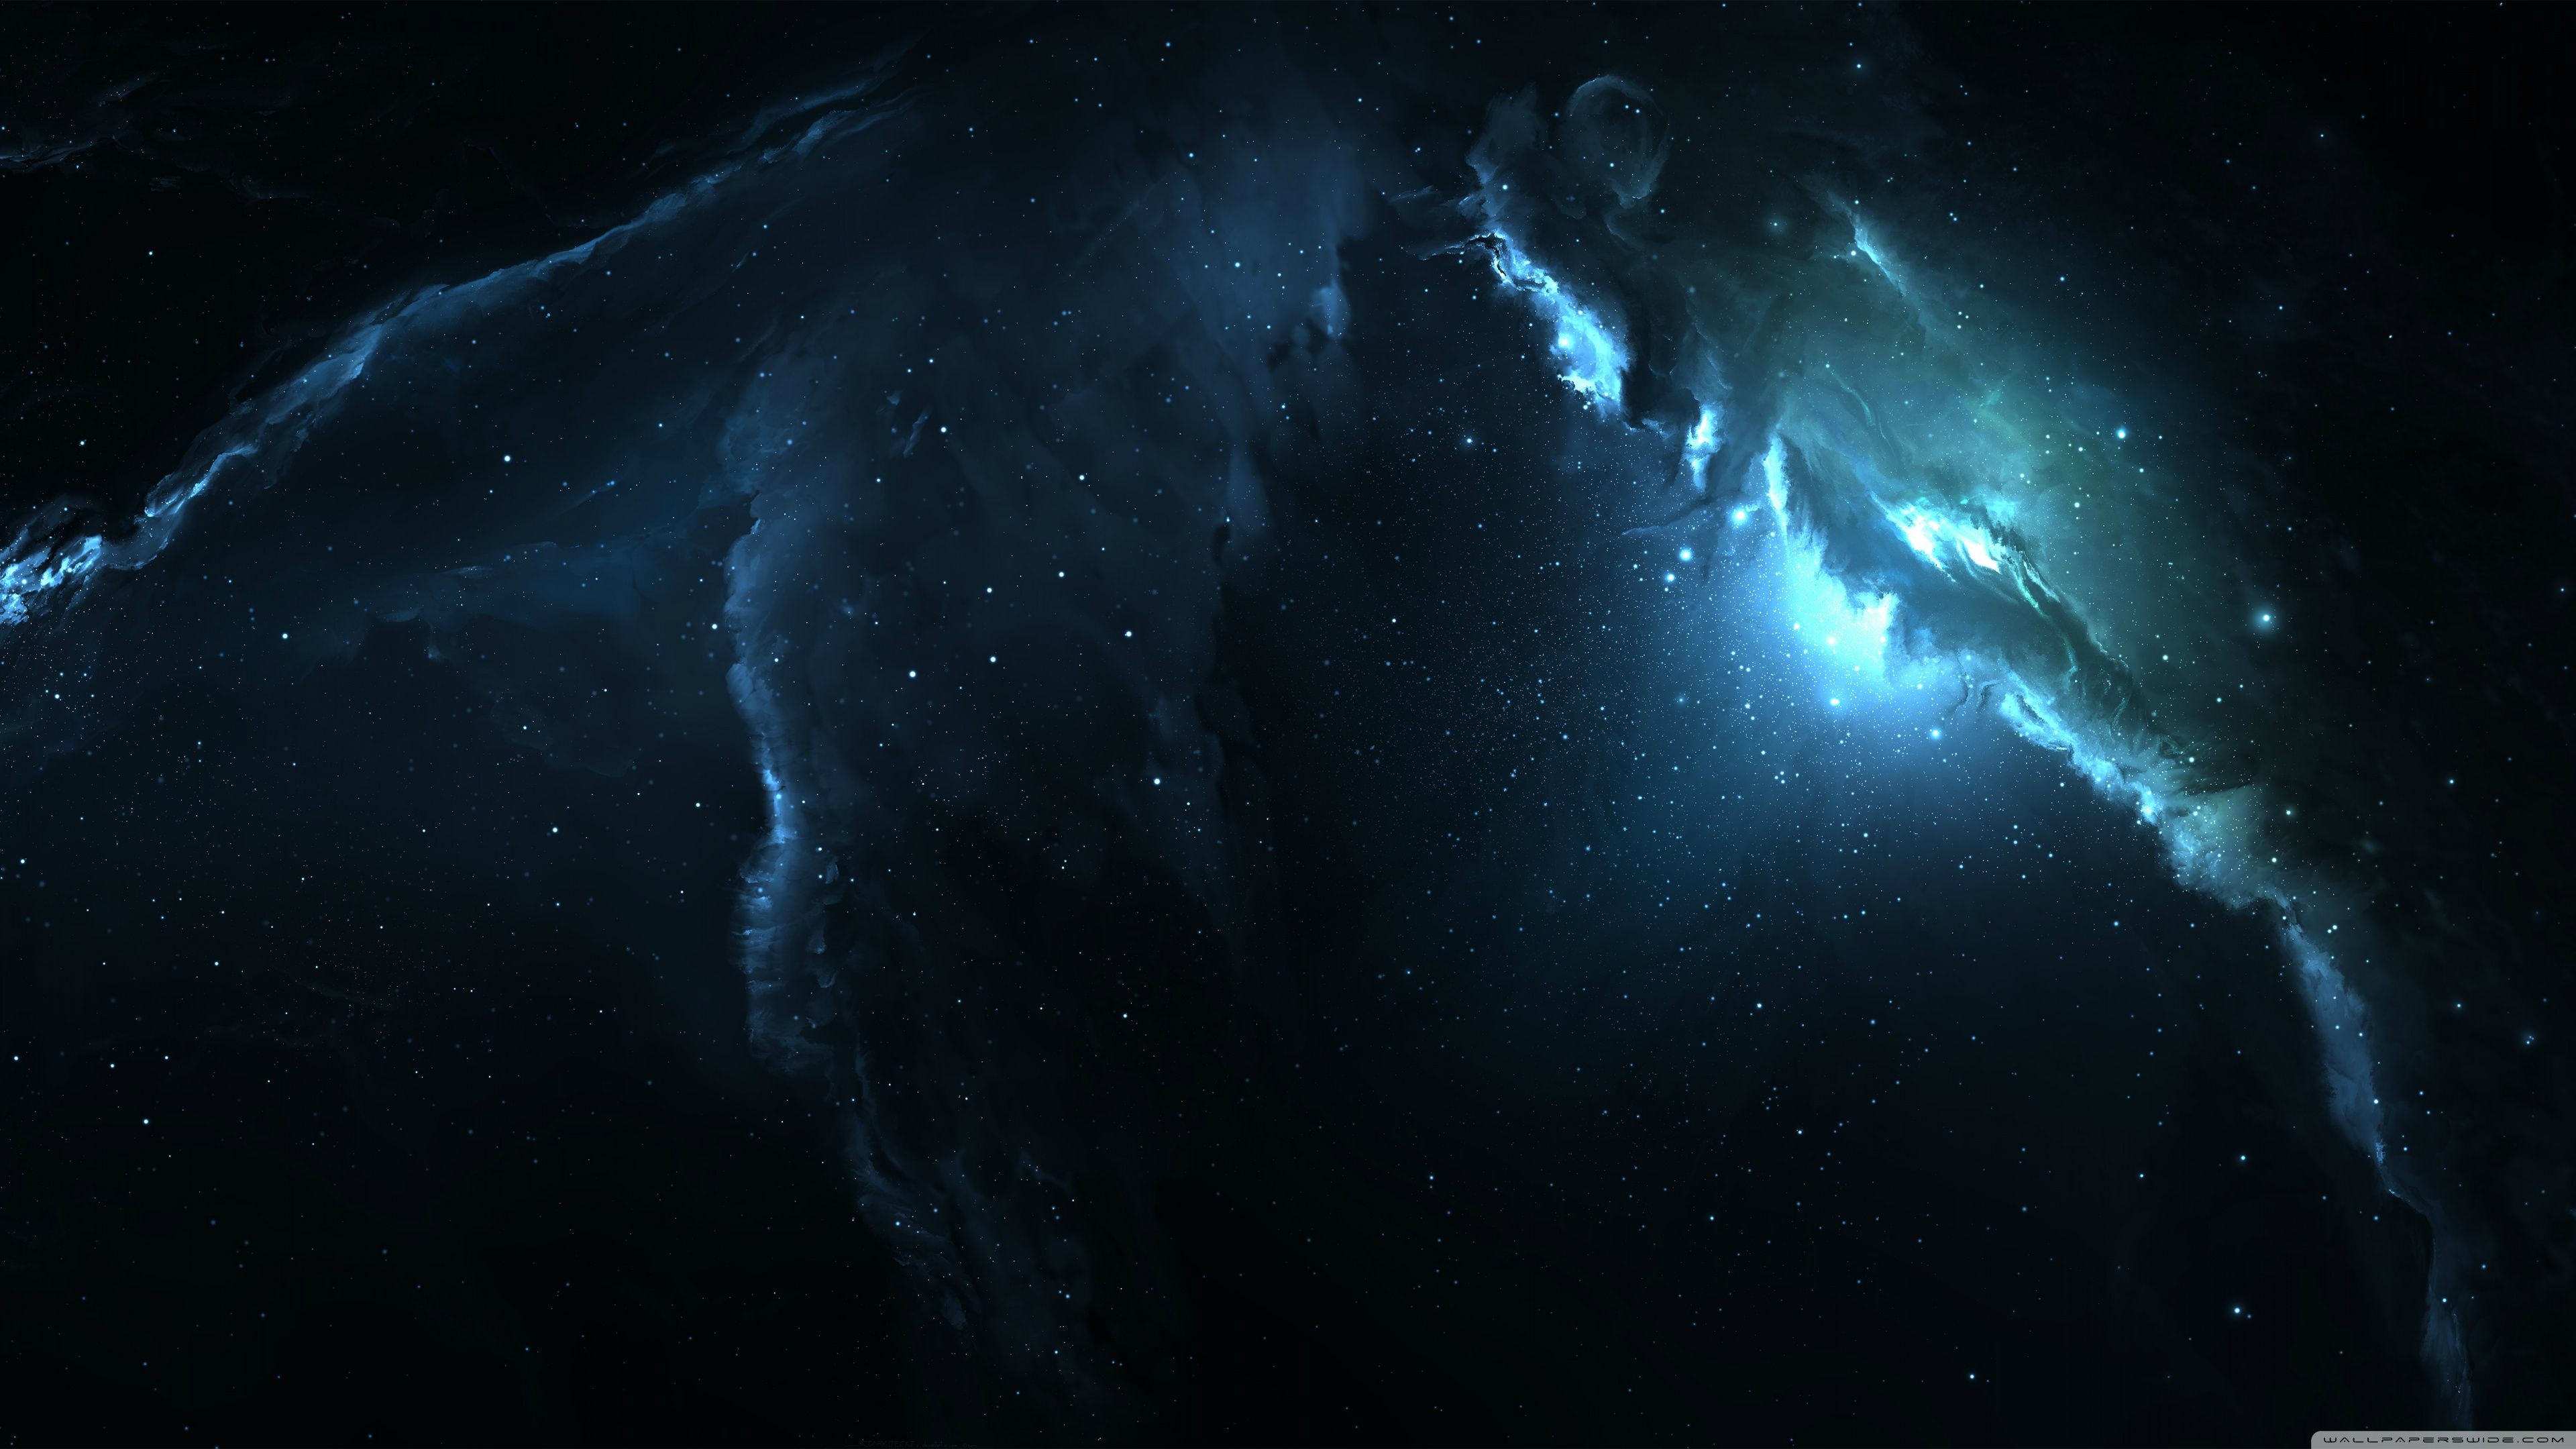 4k Wallpaper Space ·① Download Free Awesome High Resolution Wallpapers